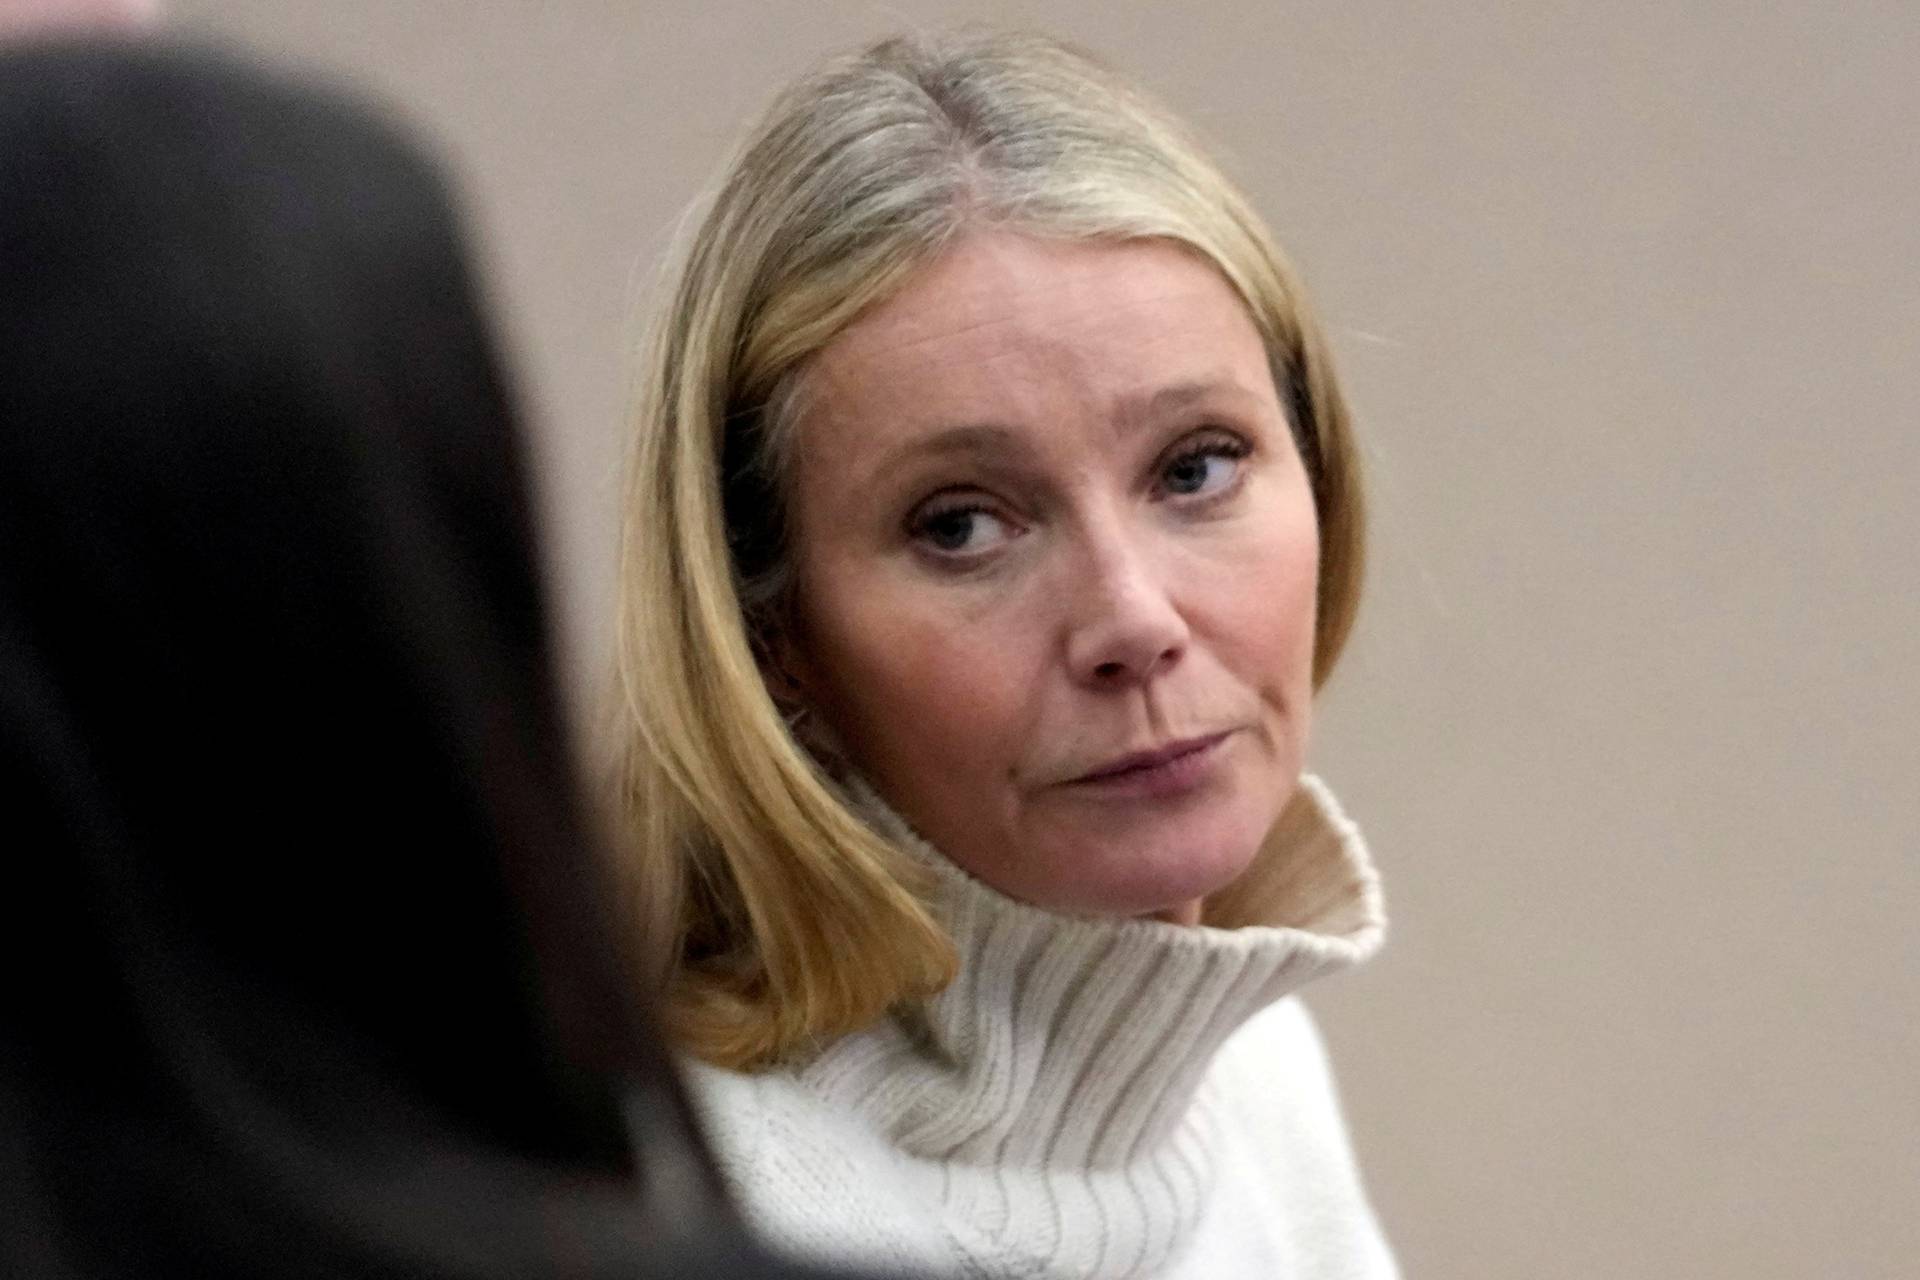 Actor Gwyneth Paltrow looks on before leaving the courtroom in Park City, Utah